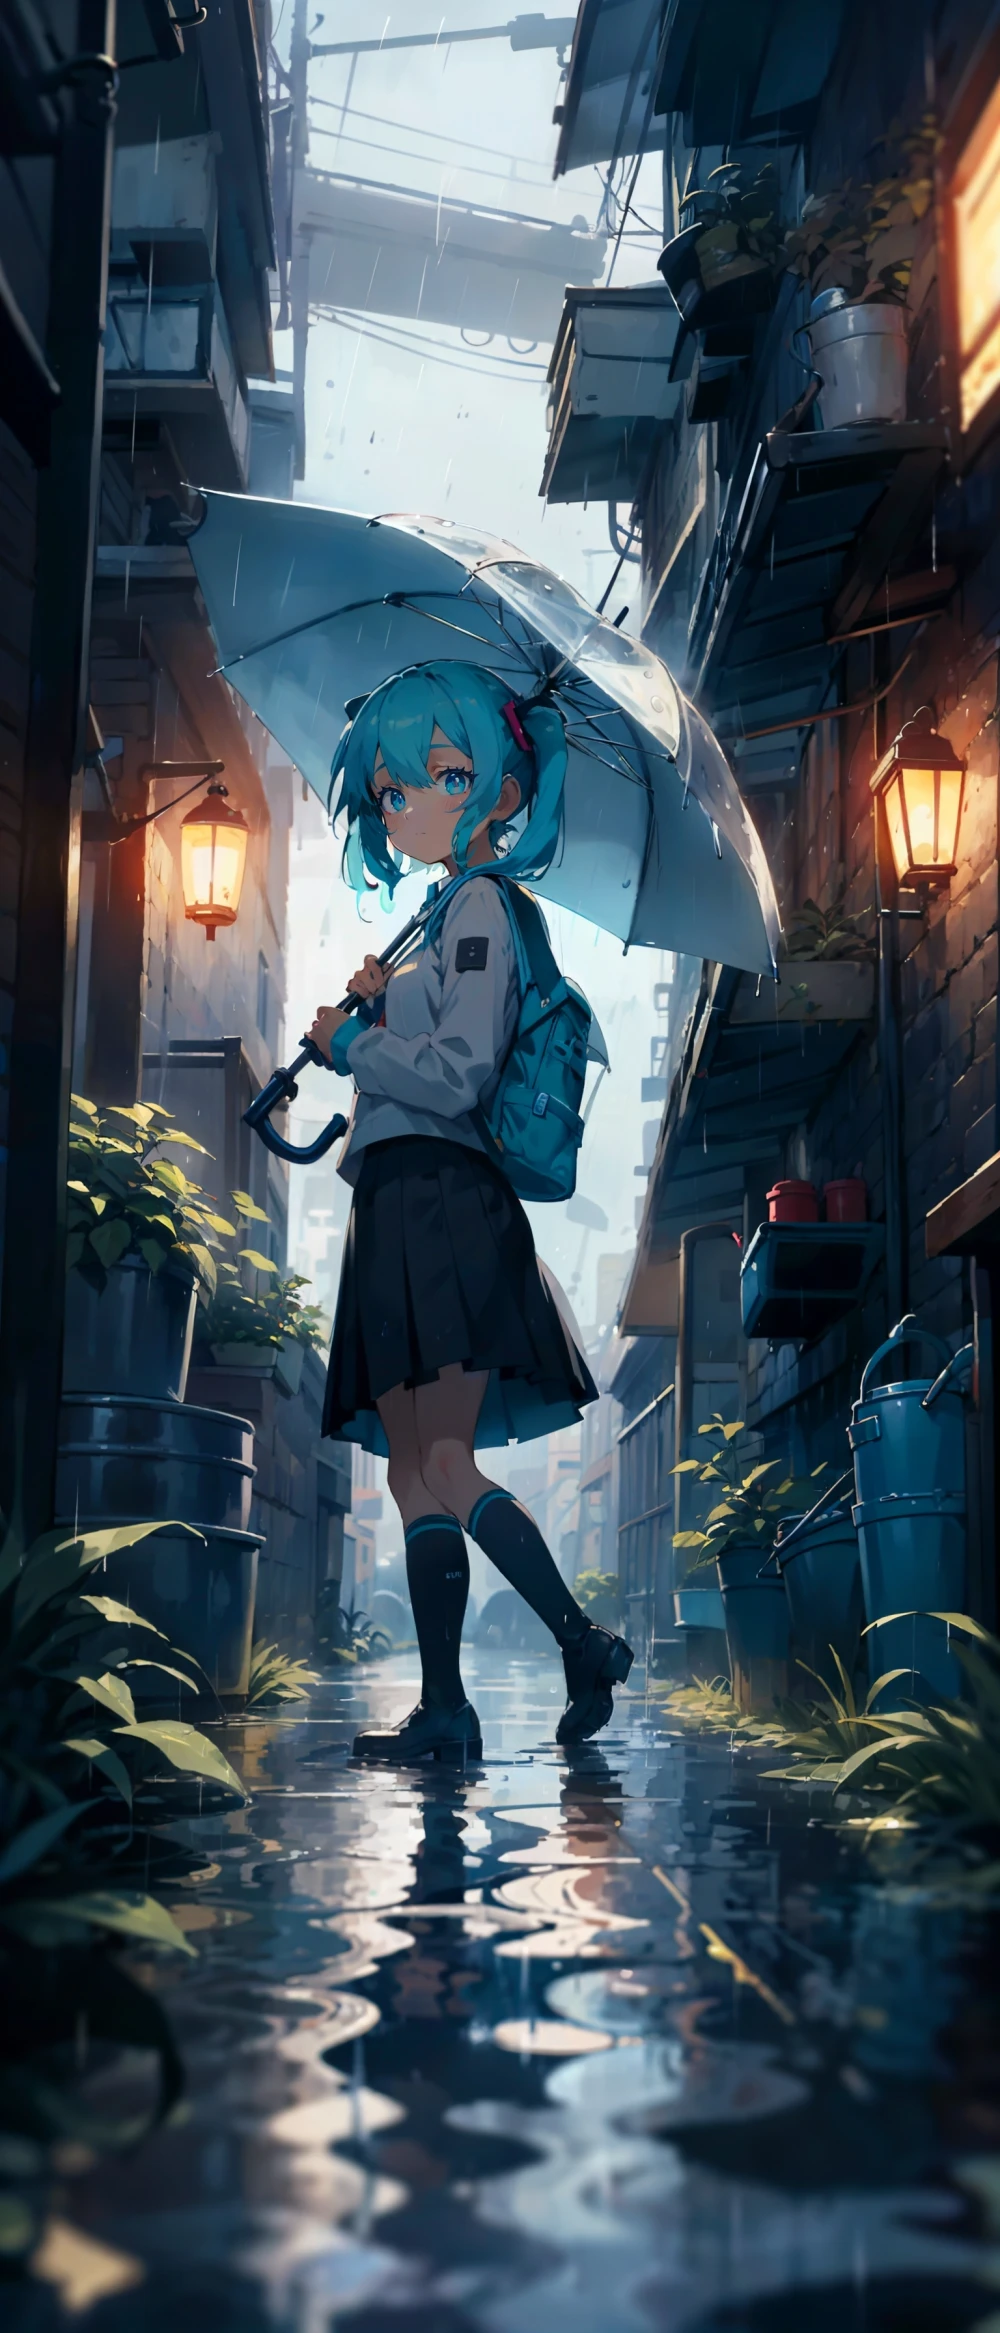 hatsune-miku-anime-style-all-ages-2-39